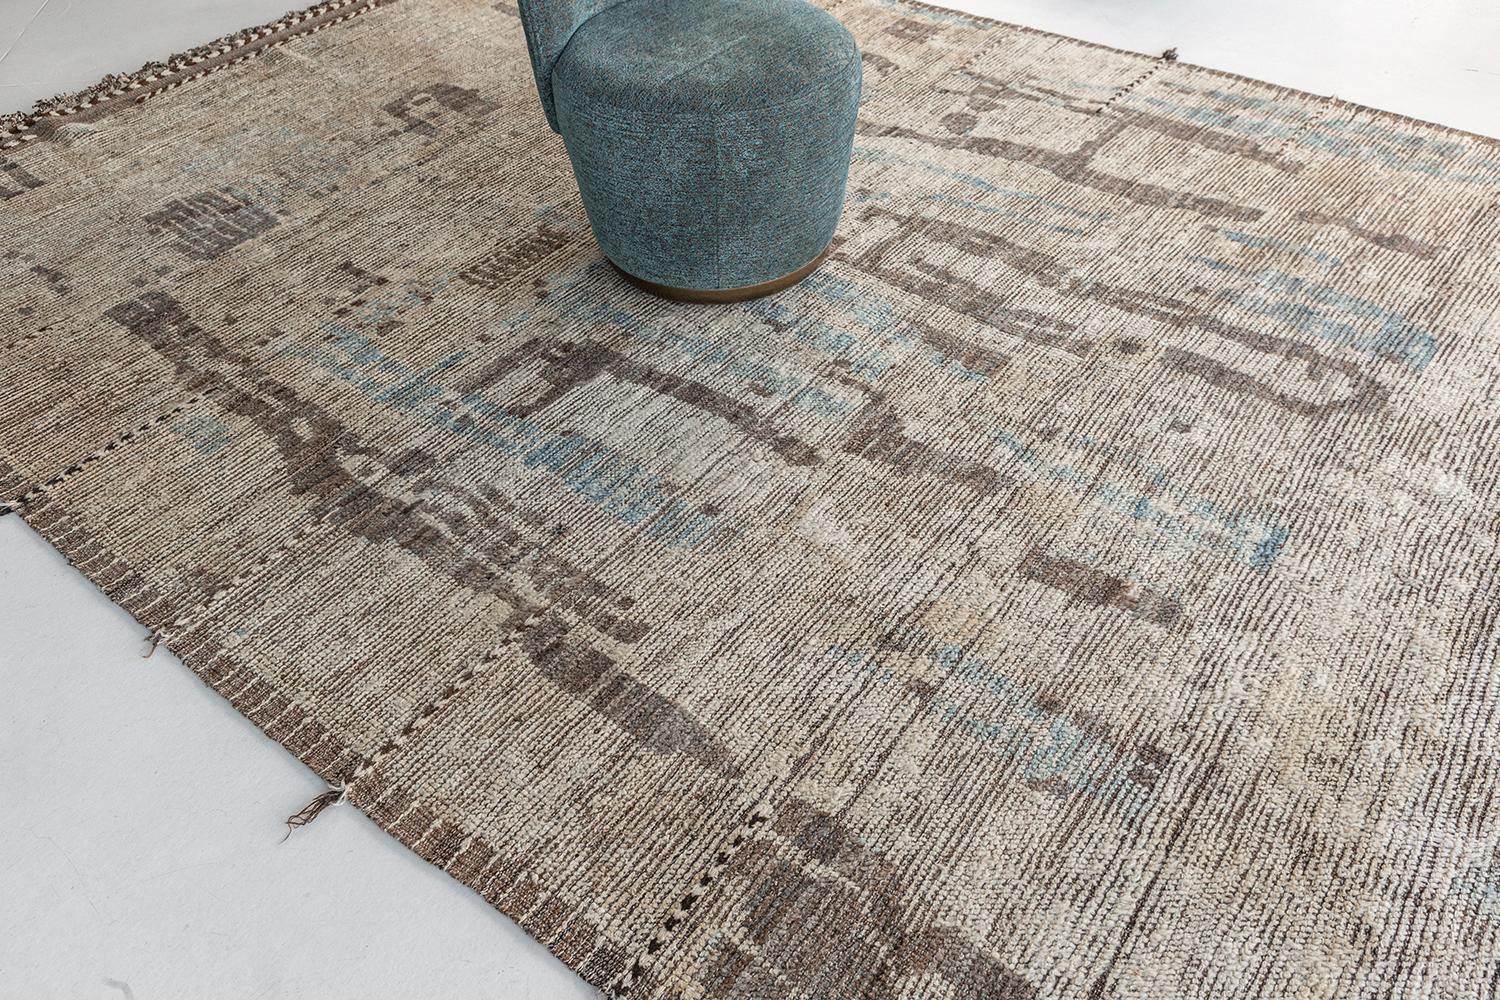 'Nakhla' is a natural earth toned rug and a modern interpretation of the Moroccan world. This rugs irregular ivory, khaki, blue, and salt and pepper strokes resembles the fibers of nature and their ability to be used for crafts such as cords and